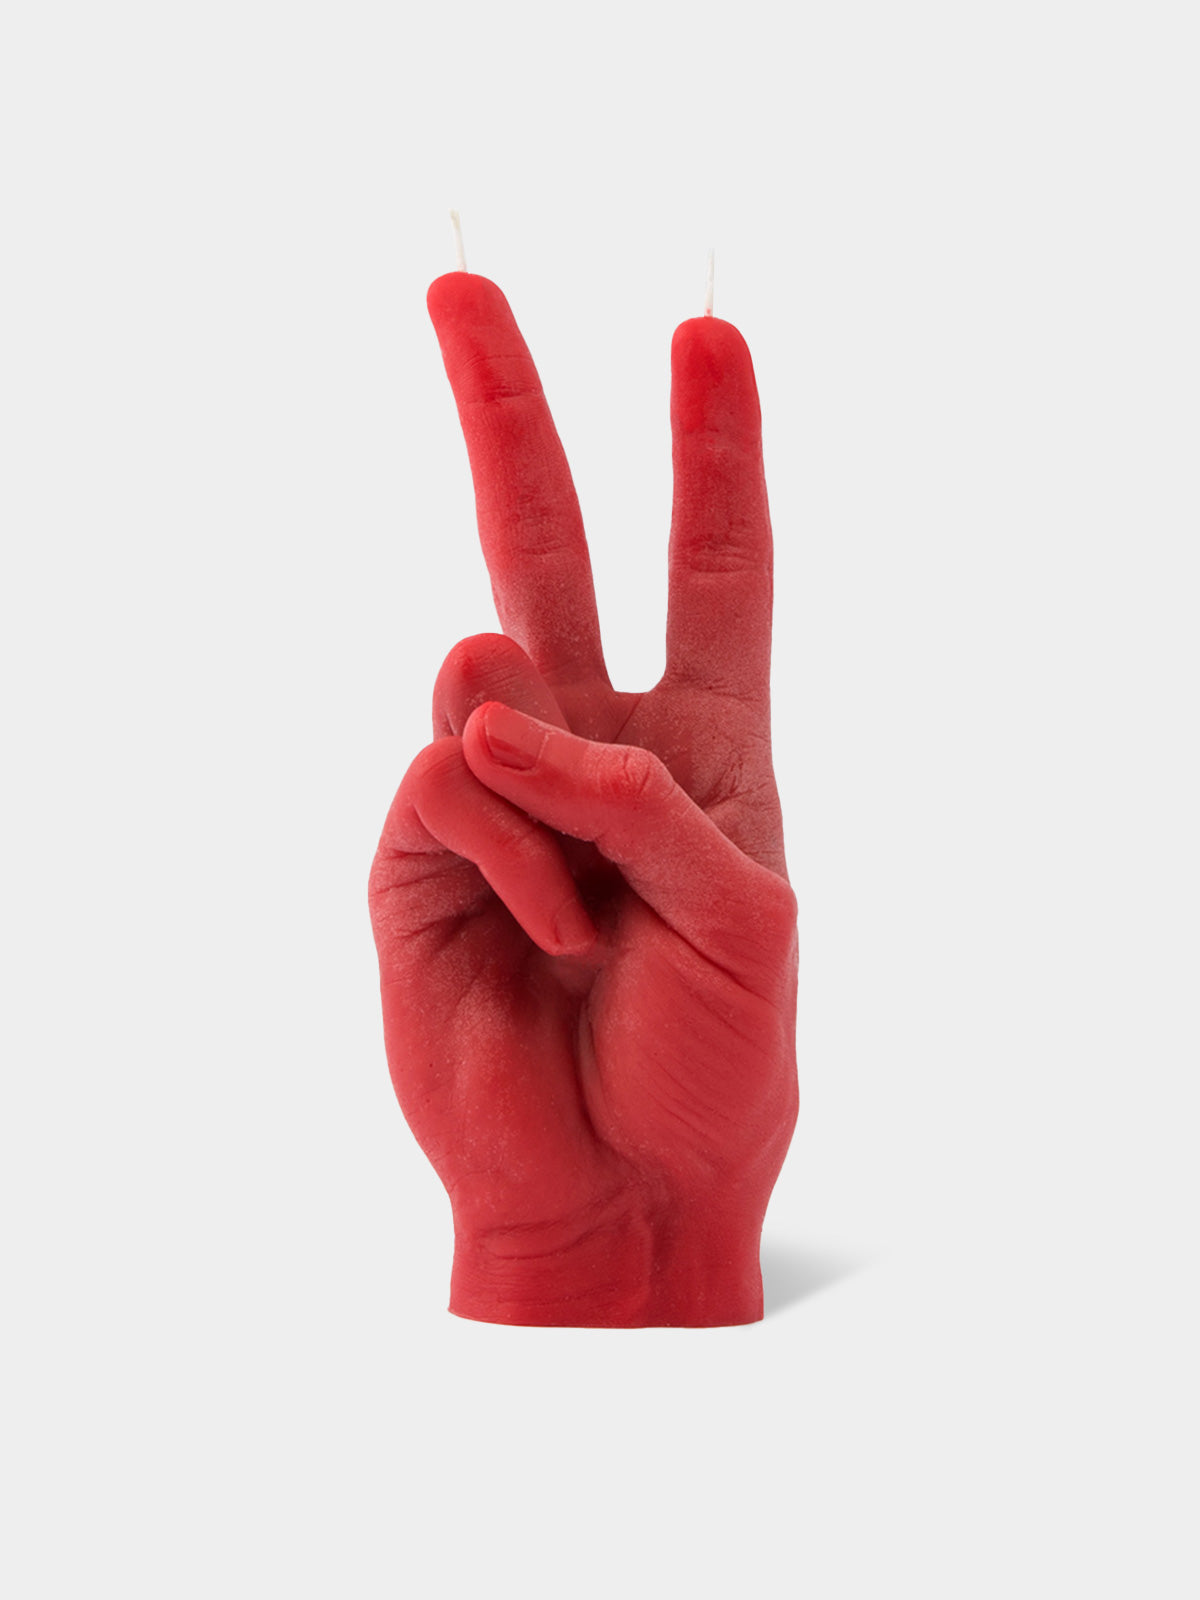 CandleHand "Peace" Red